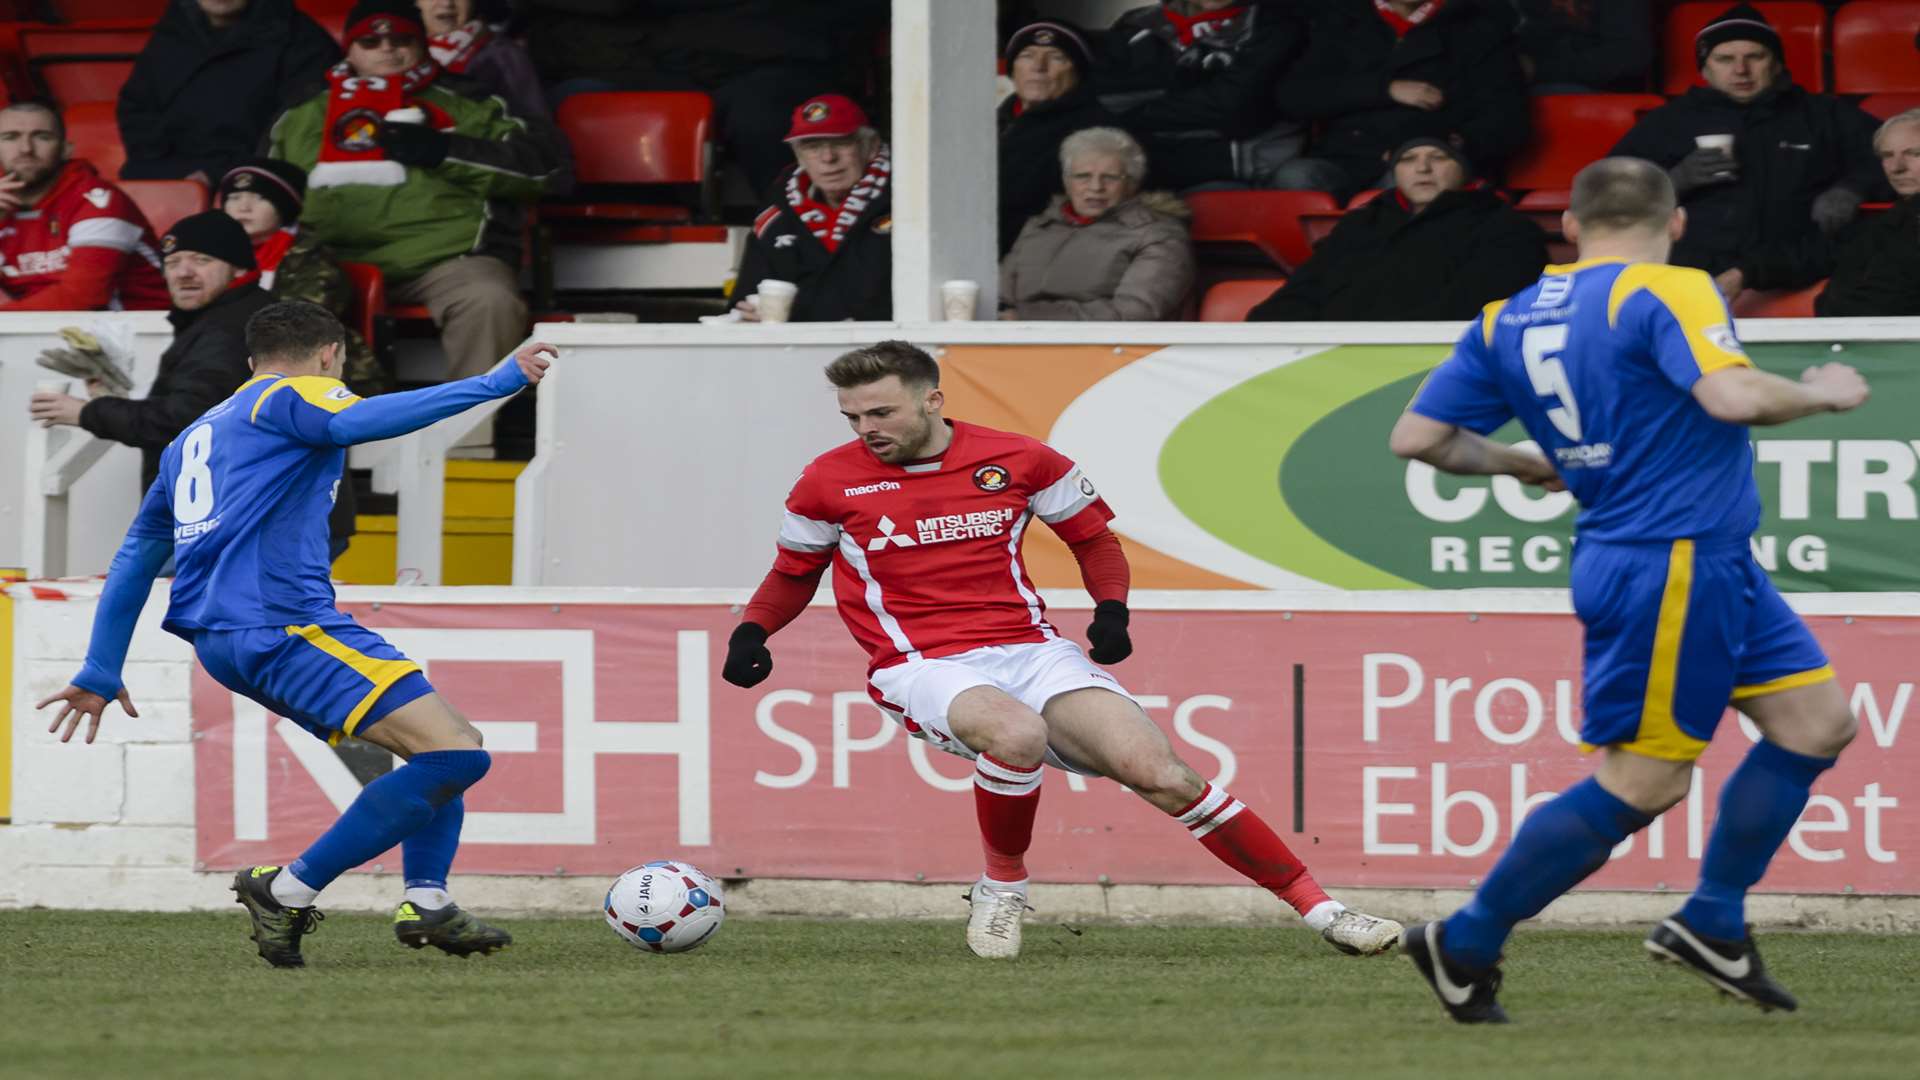 Matt Godden and Ebbsfleet couldn't score against Hayes & Yeading Picture: Andy Payton